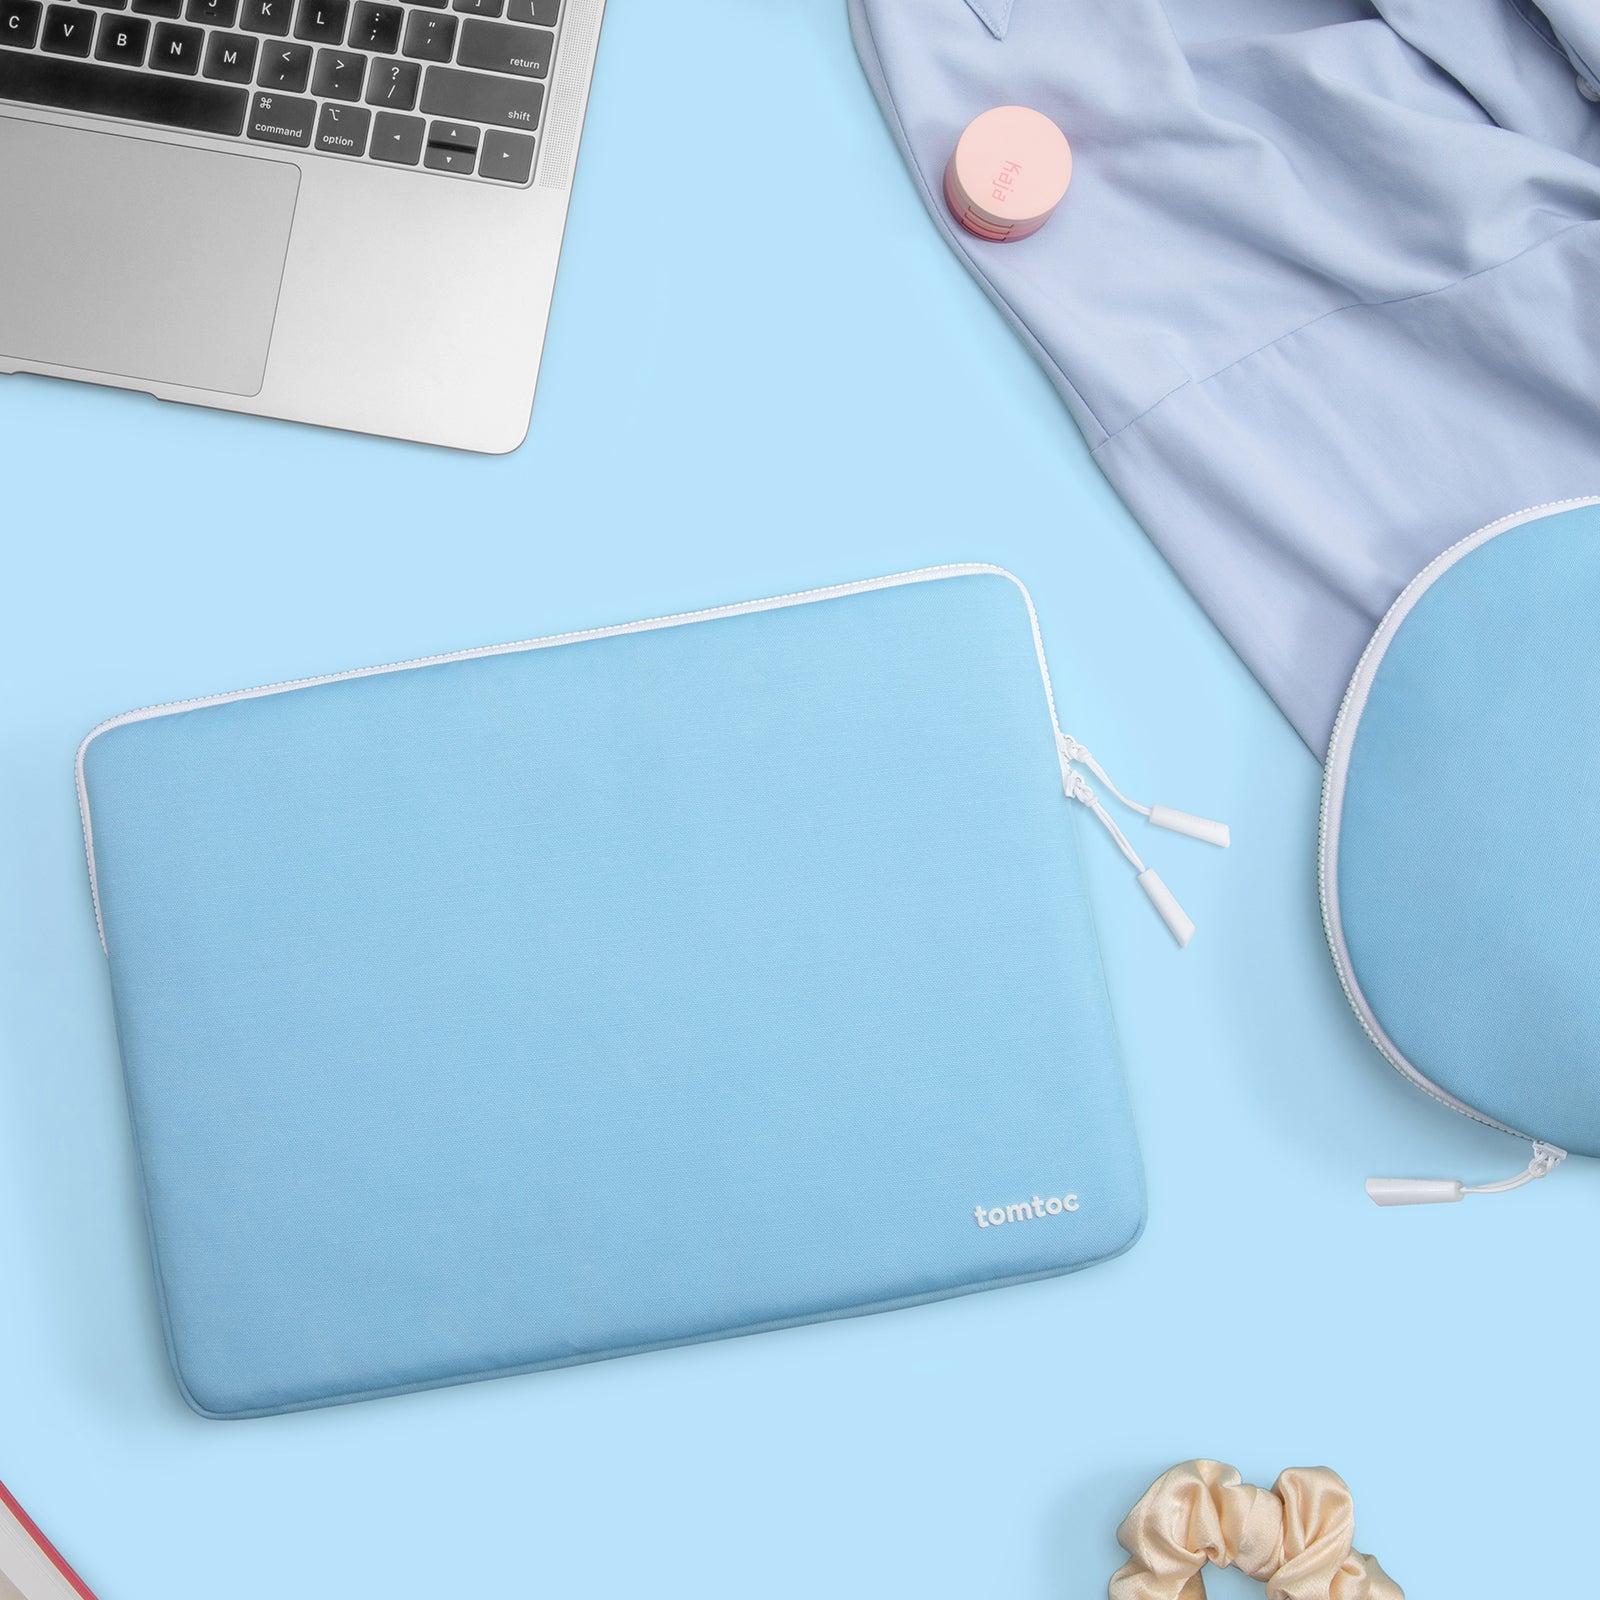 Soft Tablet Laptop Liner Bag for Macbook Air 13.3 Ipad 7/8/9/10th